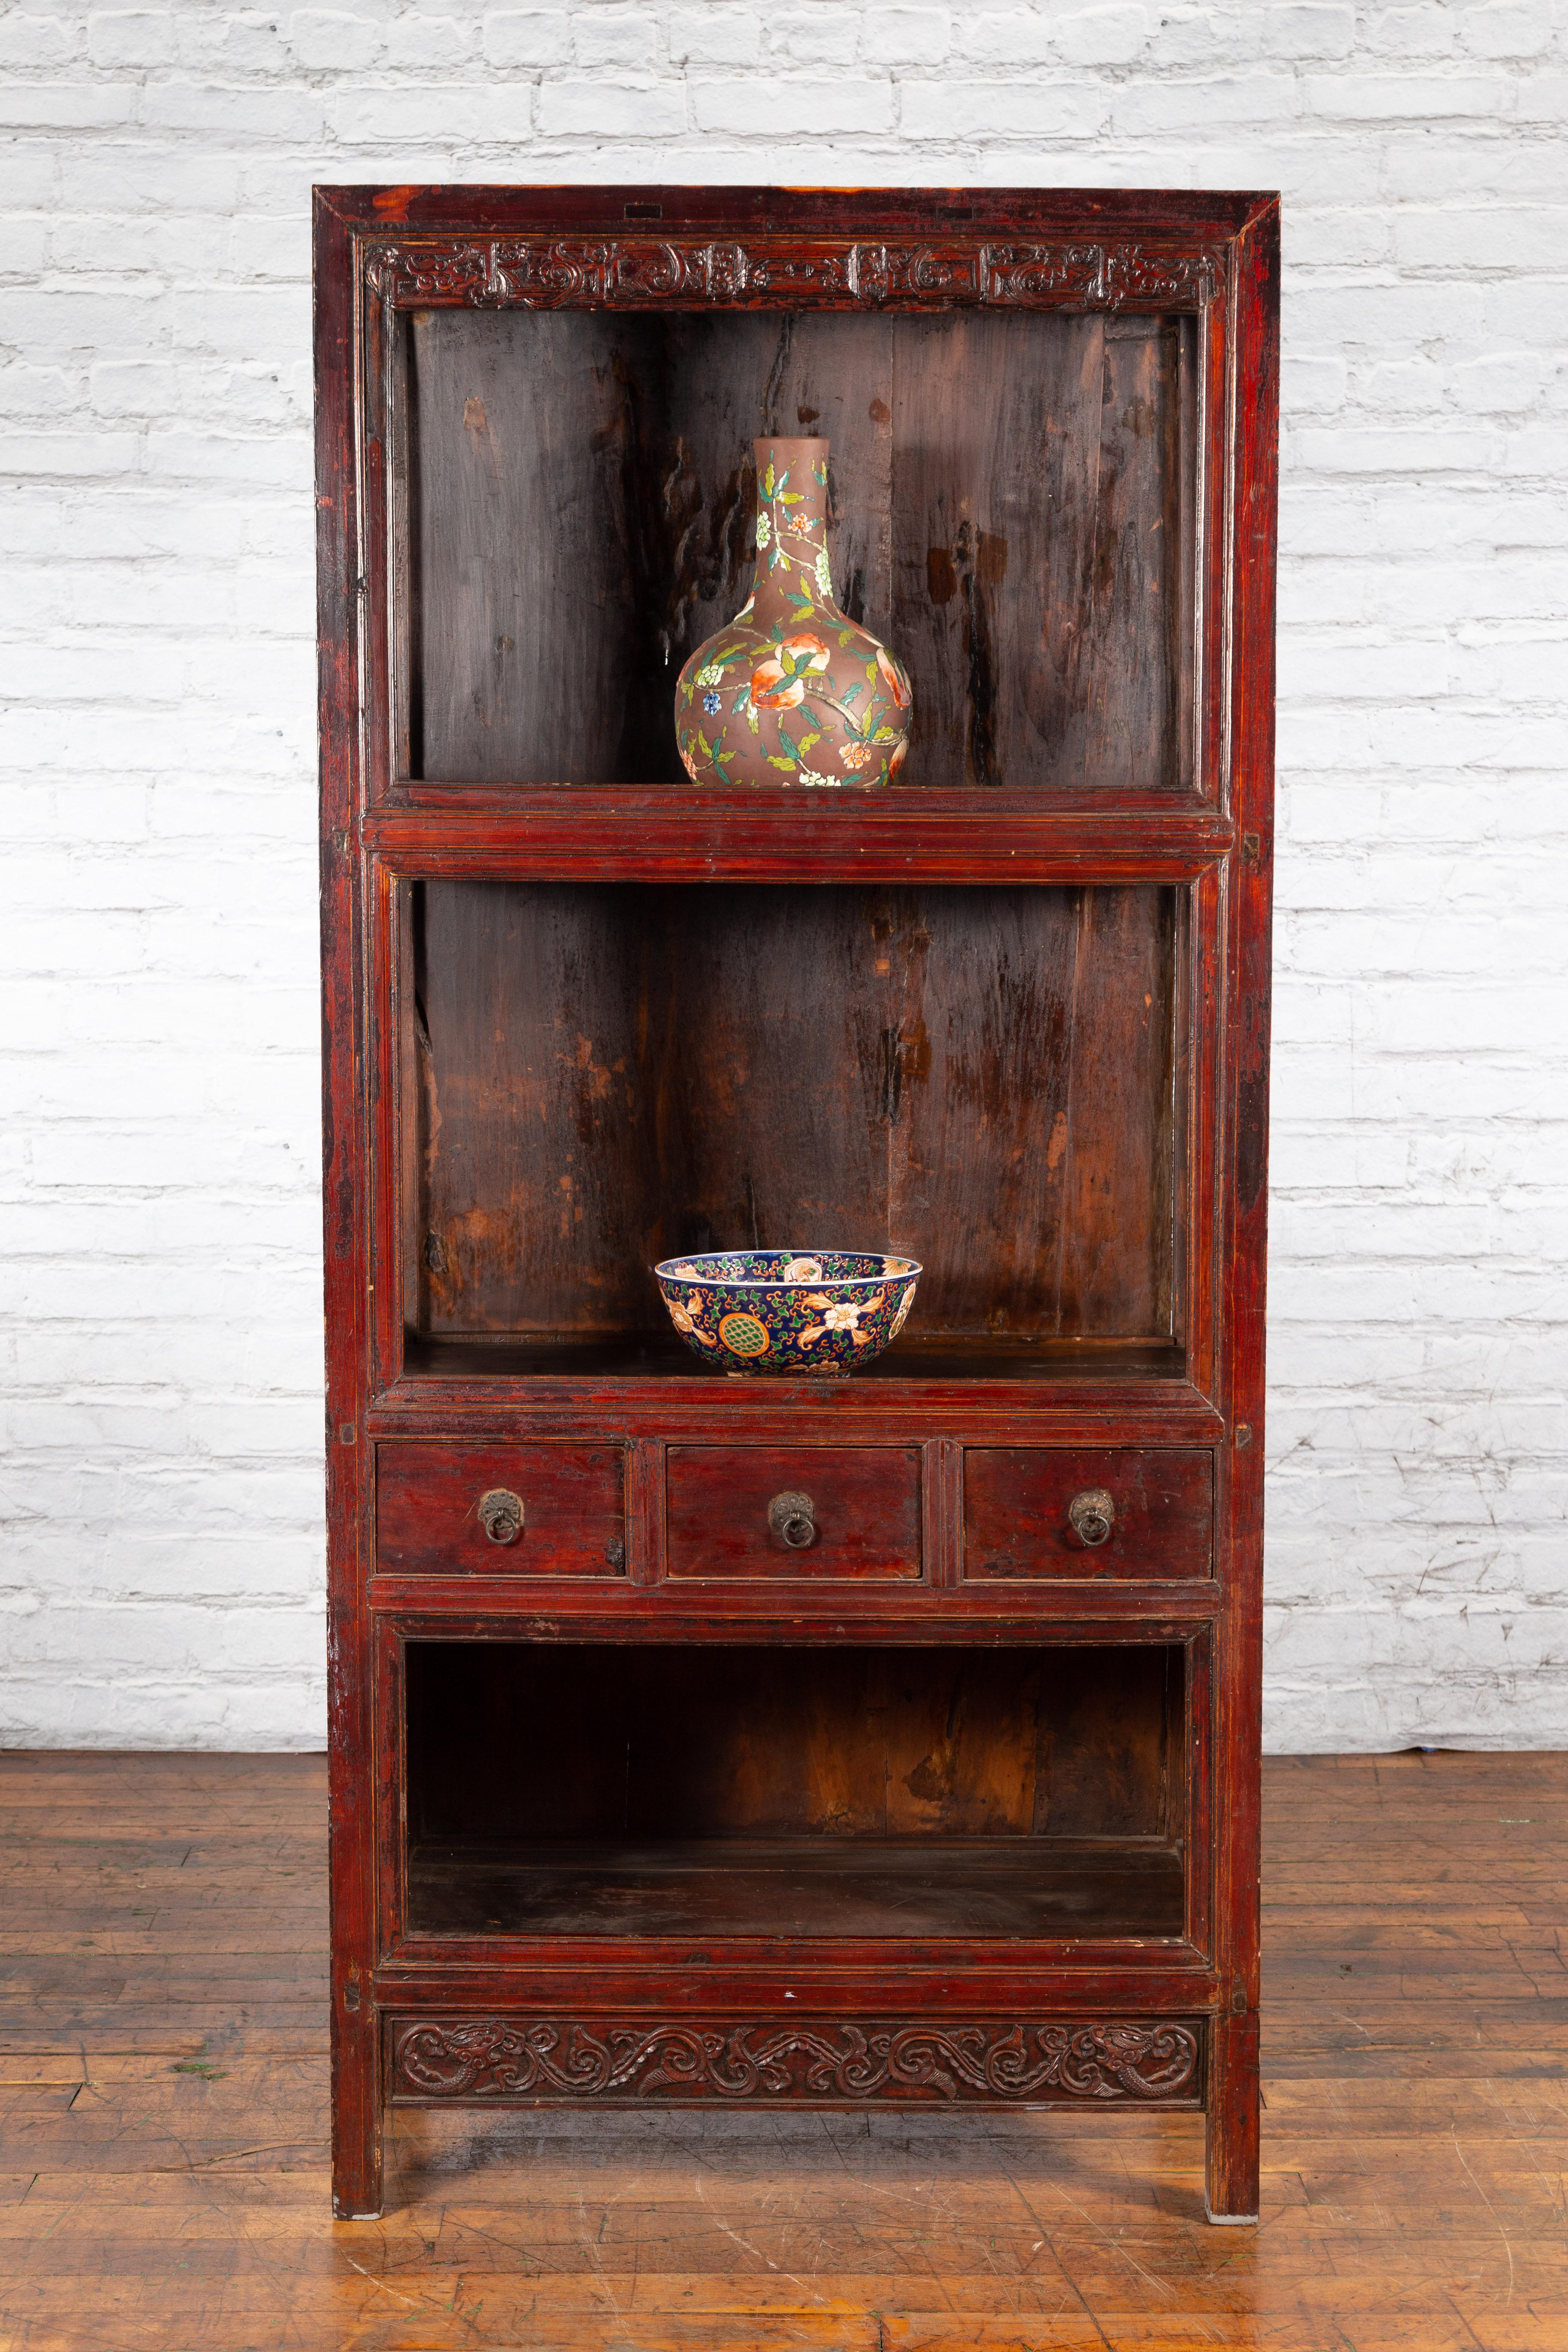 Chinese Qing Dynasty 19th Century Lacquered Cabinet with Carved Dragon Motifs In Good Condition For Sale In Yonkers, NY